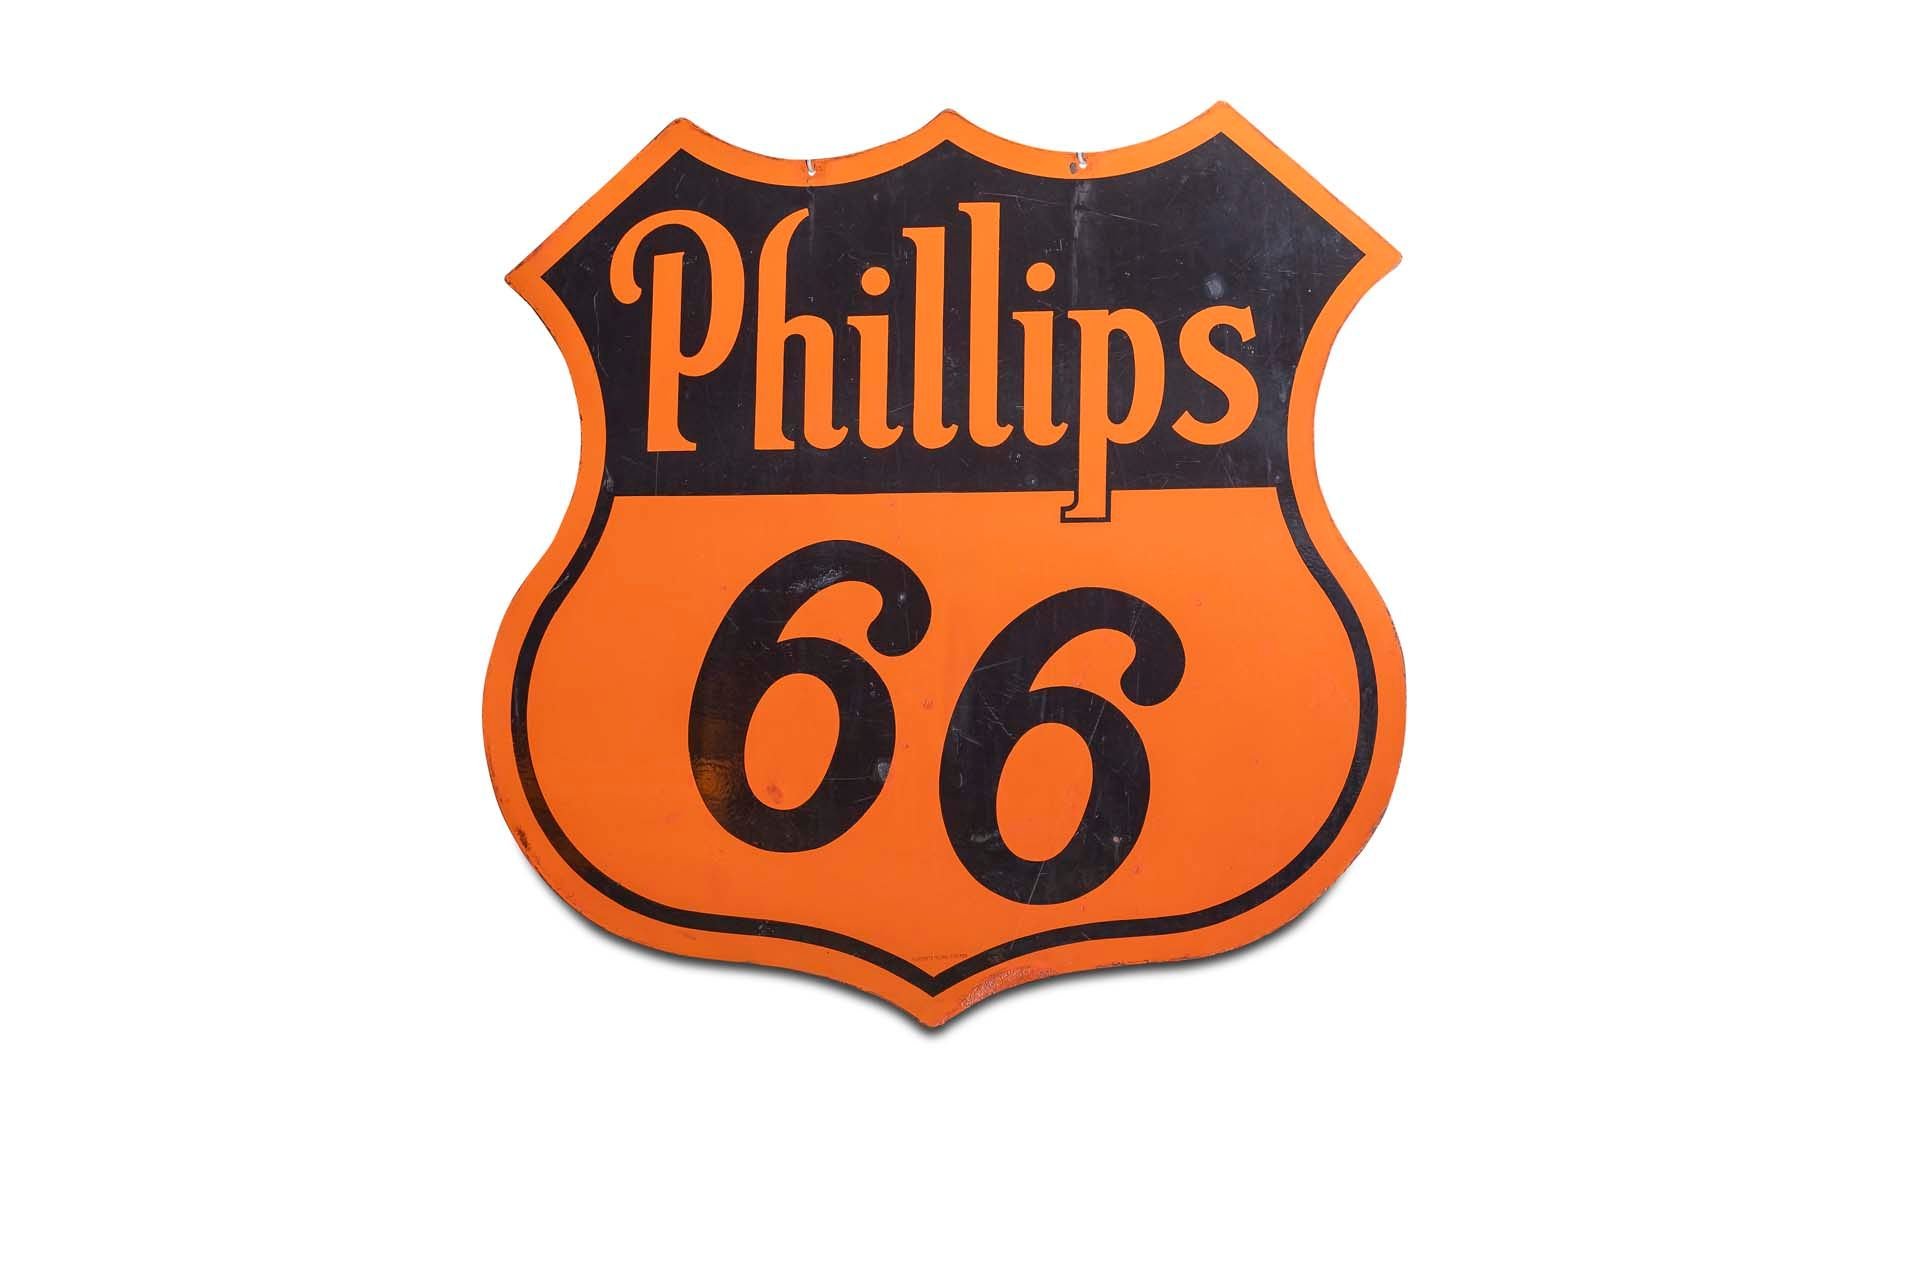 For Sale Large 'Phillips 66' Porcelain Double-Sided